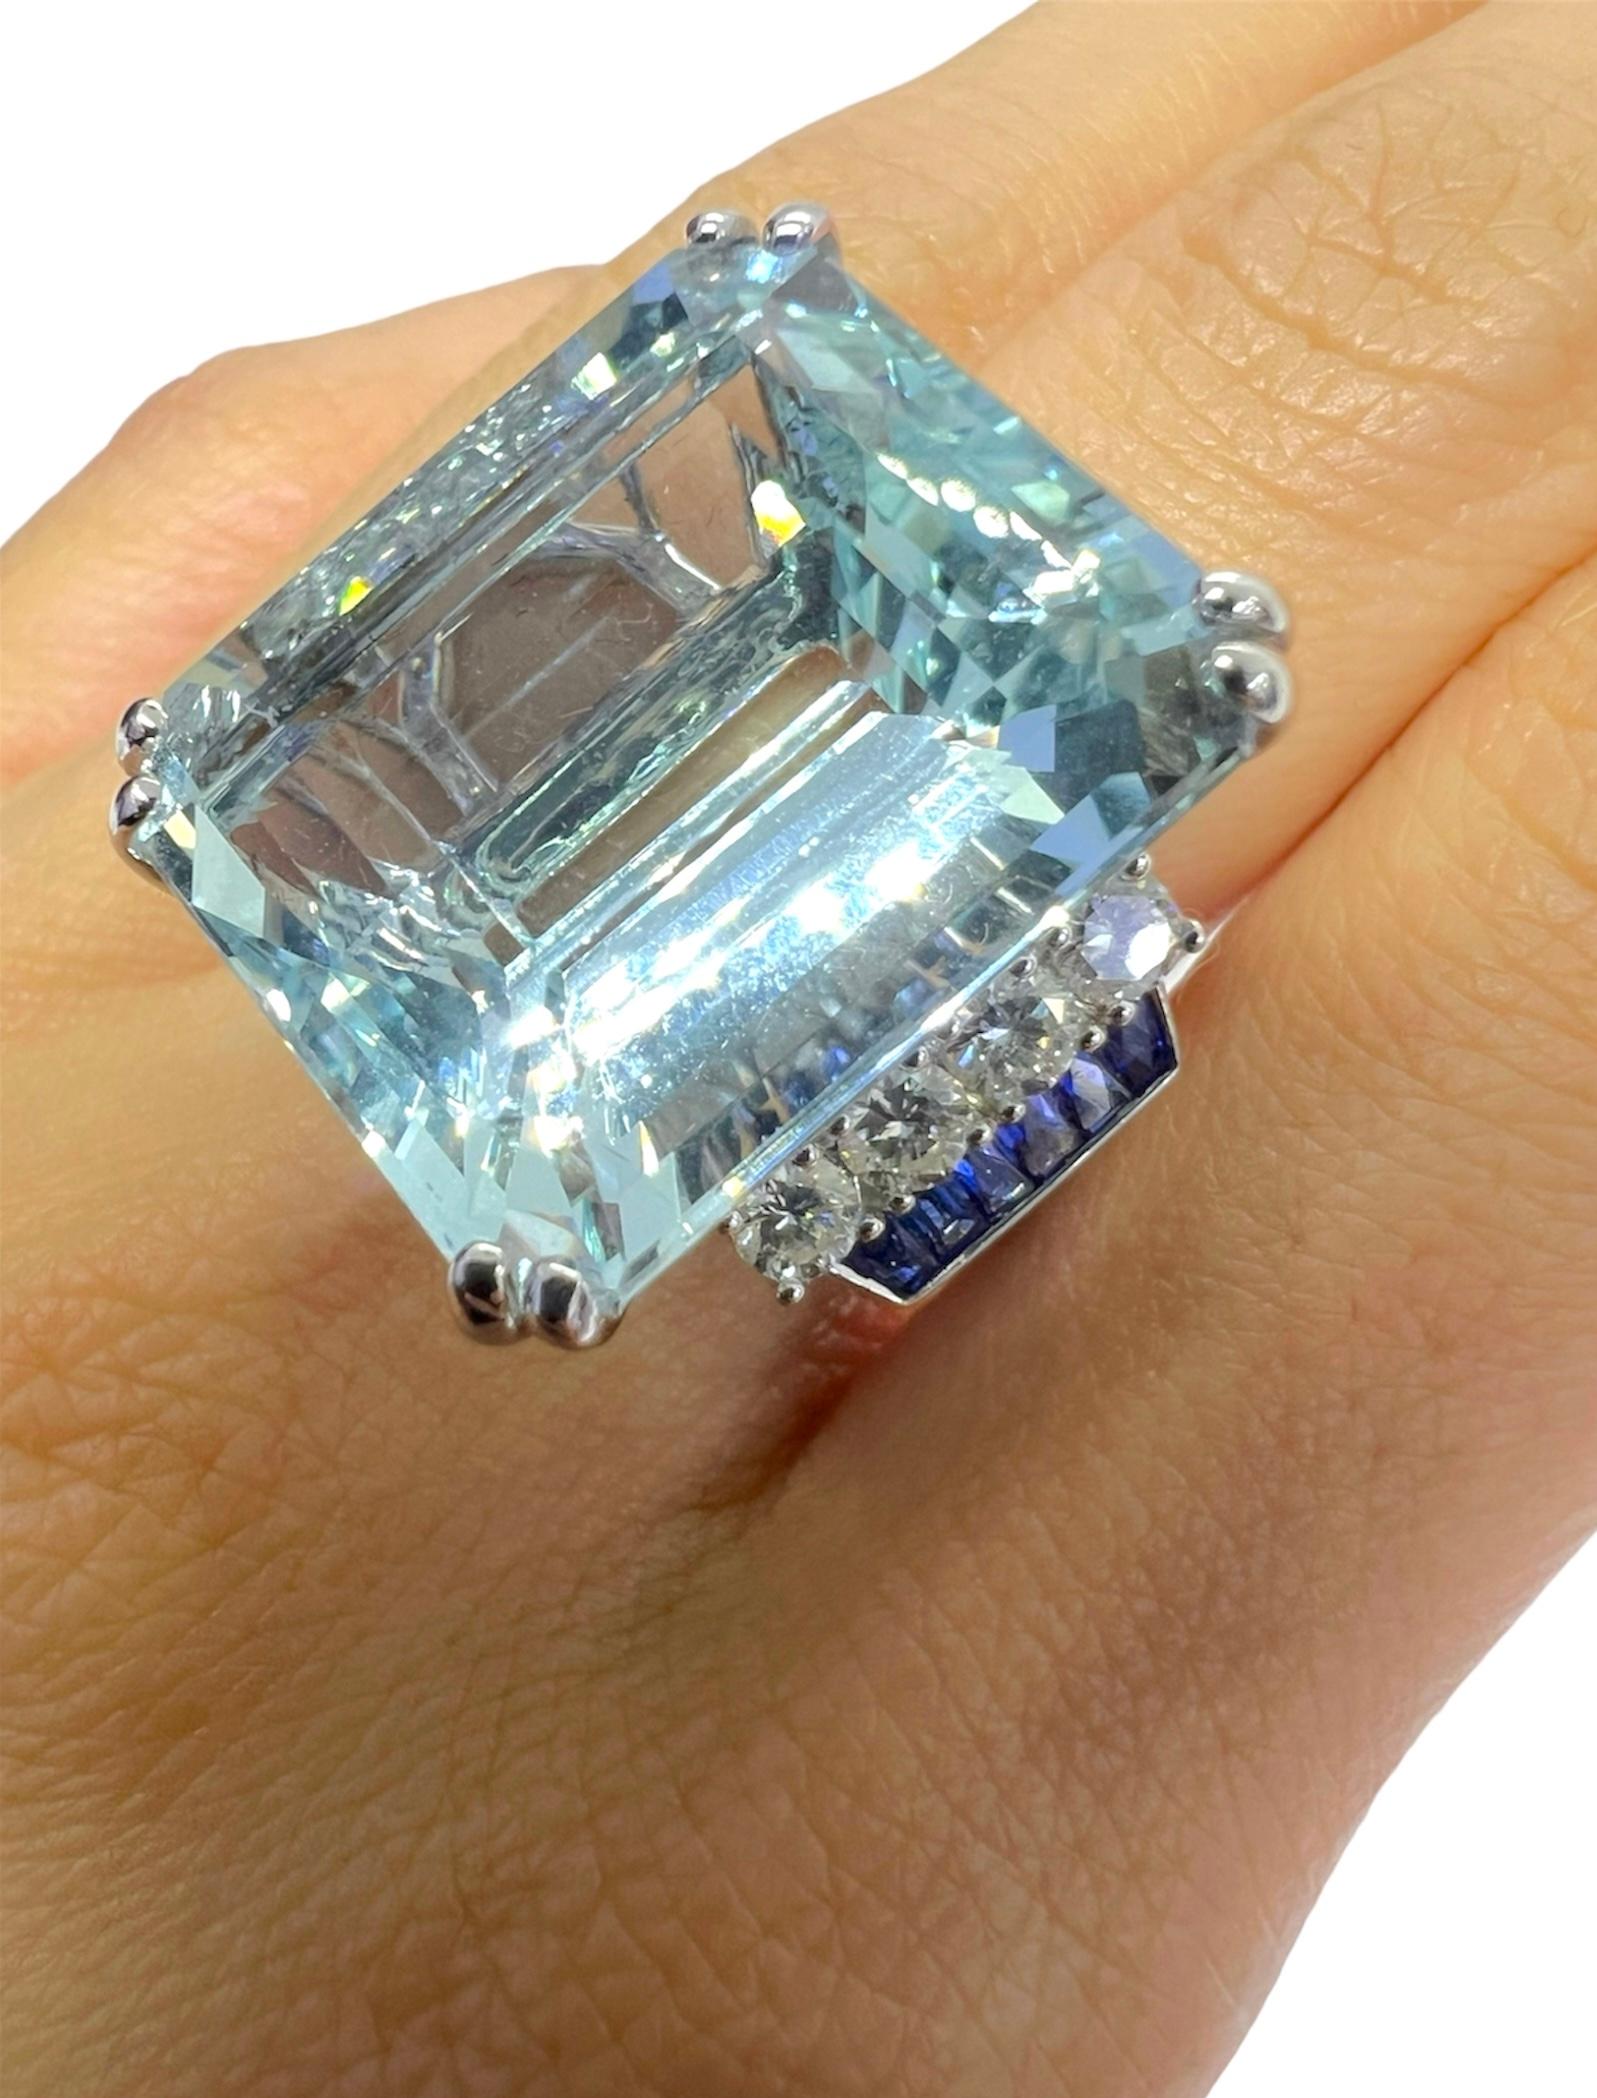 18K white gold ring with 30.93 carat aquamarine, 0.68 carat diamond and 0.69 carat sapphire. 

Sophia D by Joseph Dardashti LTD has been known worldwide for 35 years and are inspired by classic Art Deco design that merges with modern manufacturing